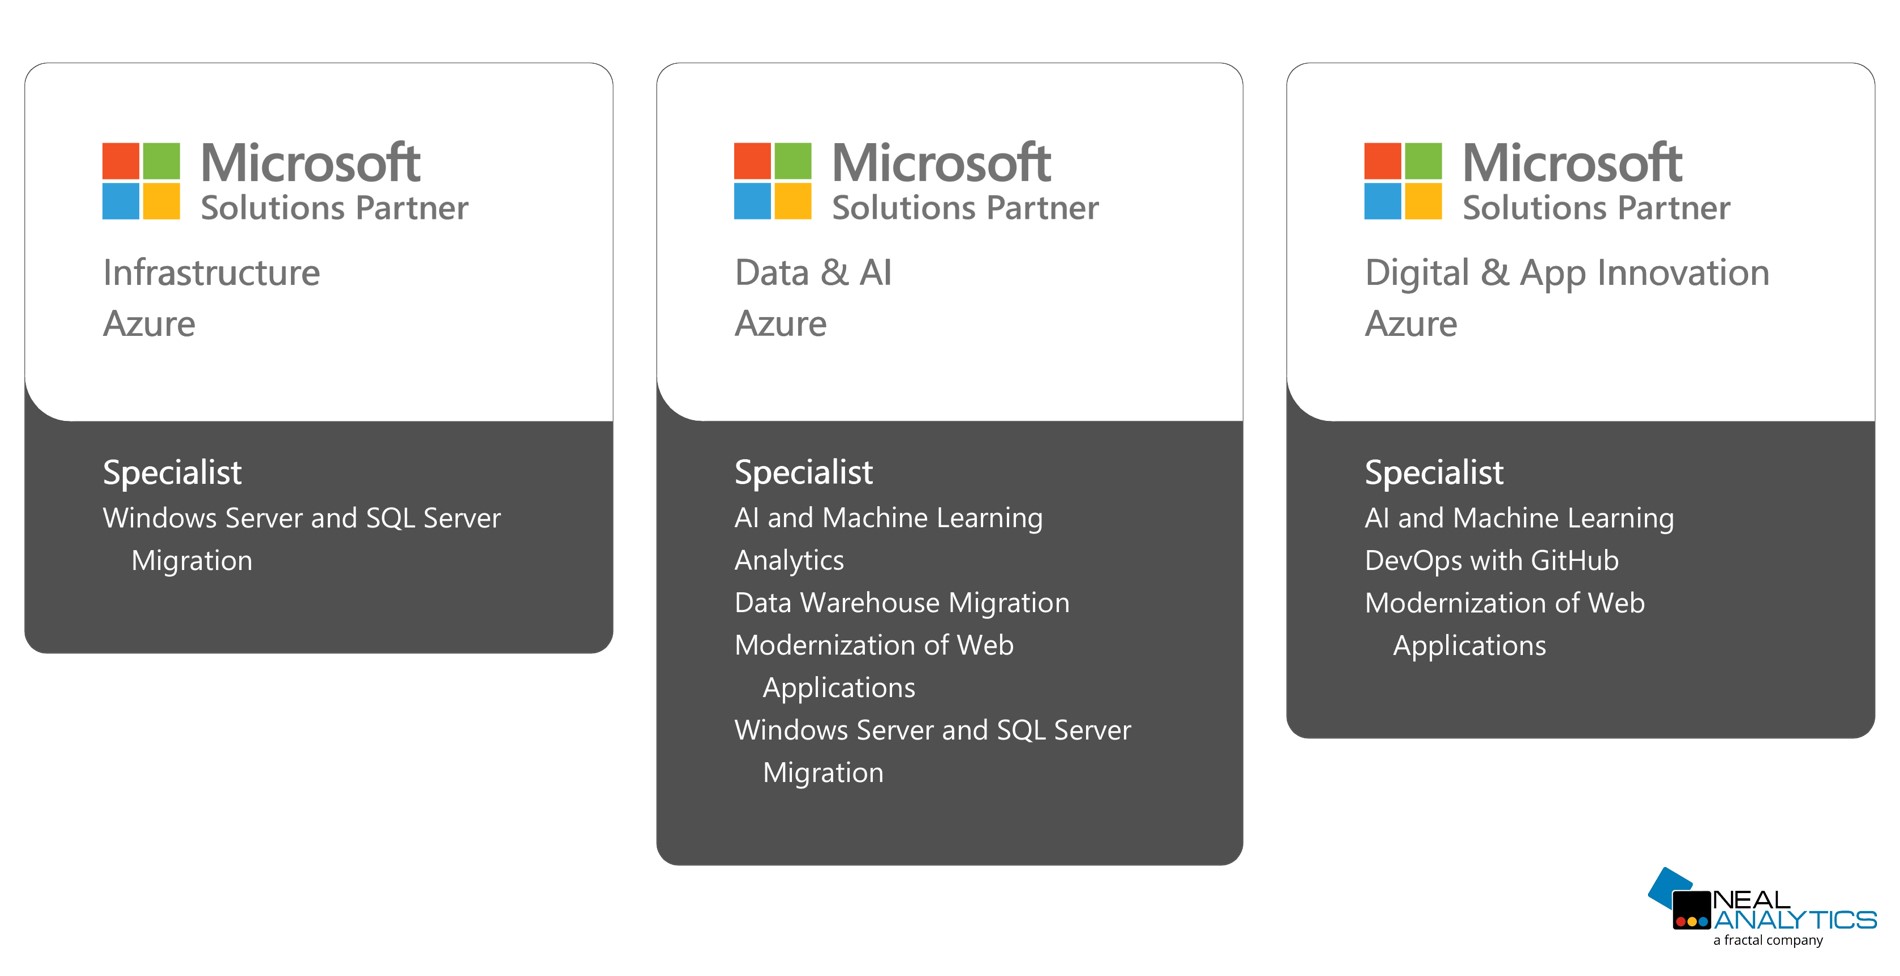 Neal Analytics Microsoft Solutions Partner for Infrastructure, Data & AI, Digital & App Innovation with specializations listed